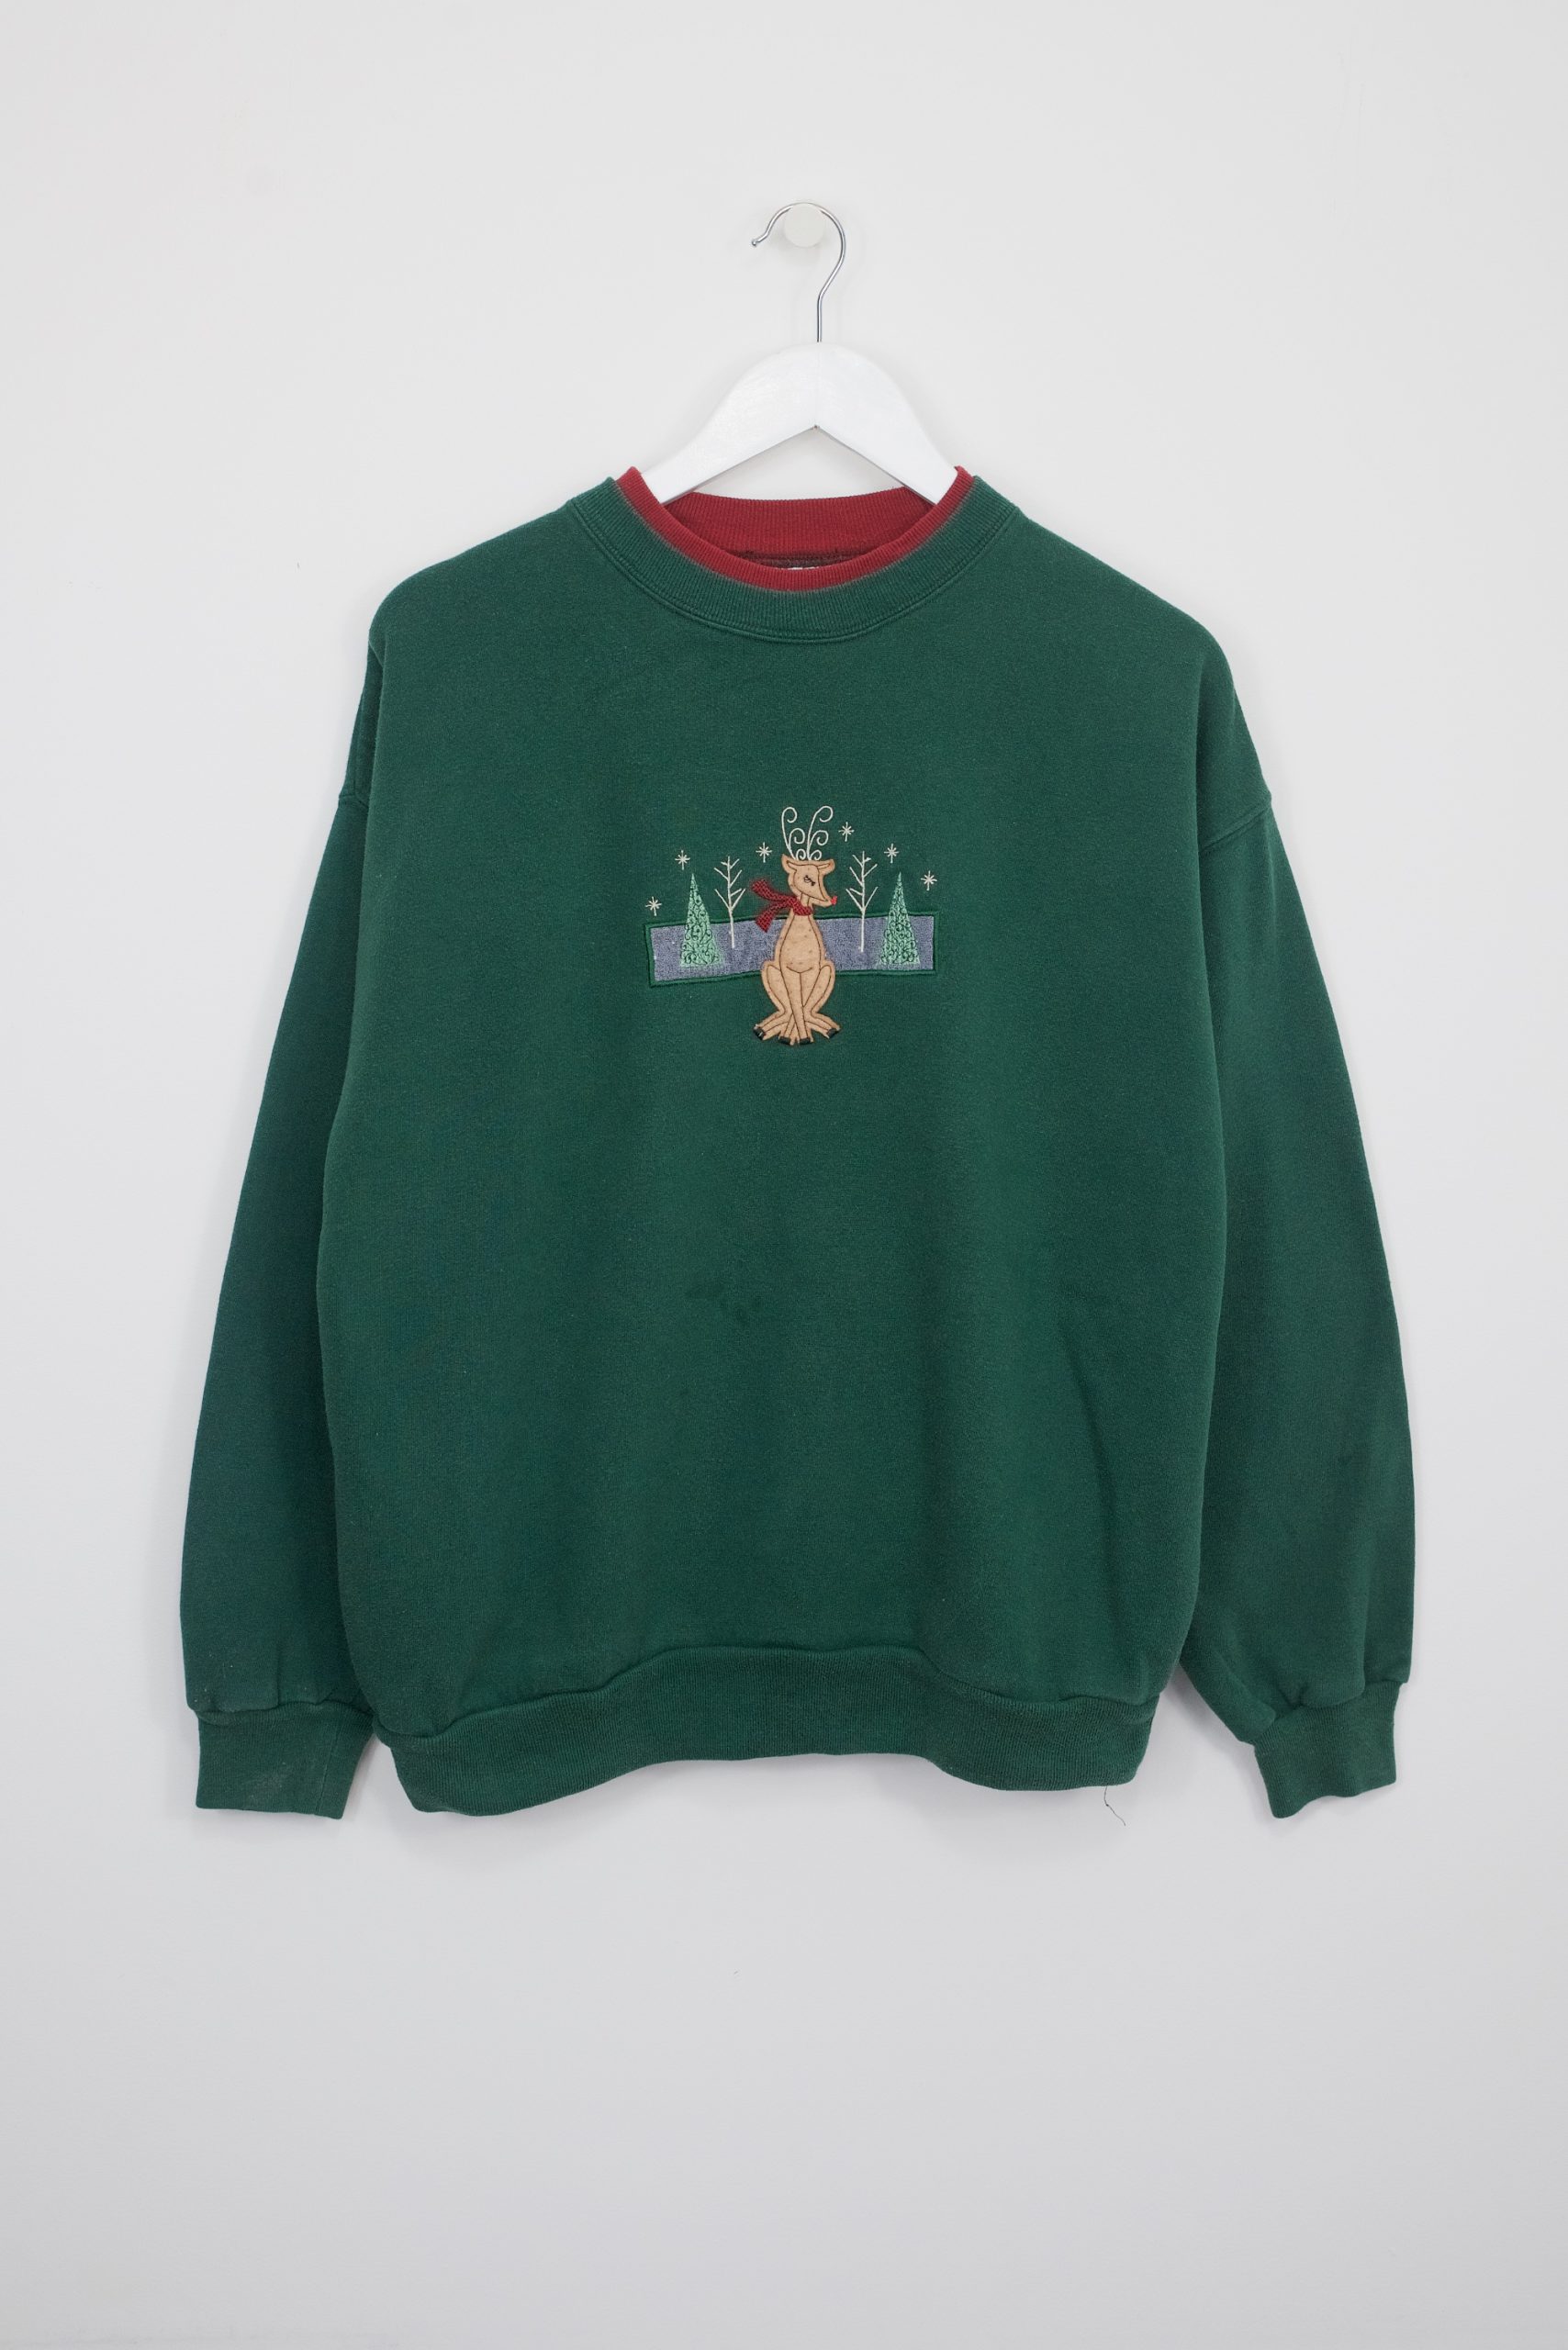 Reindeer Christmas Sweater | Save the Children Shop